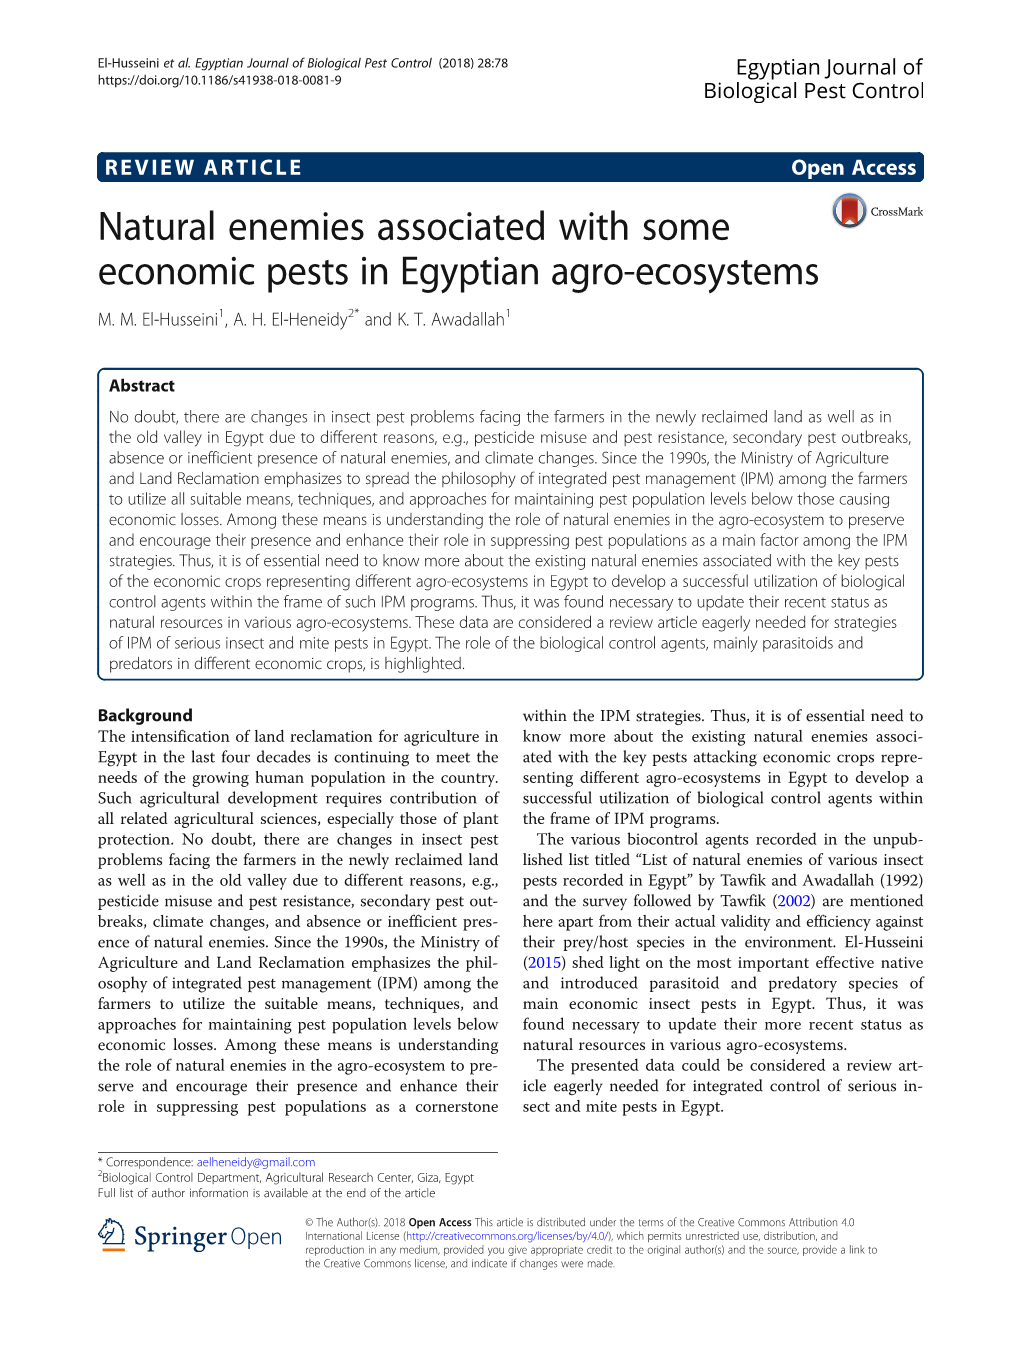 Natural Enemies Associated with Some Economic Pests in Egyptian Agro-Ecosystems M